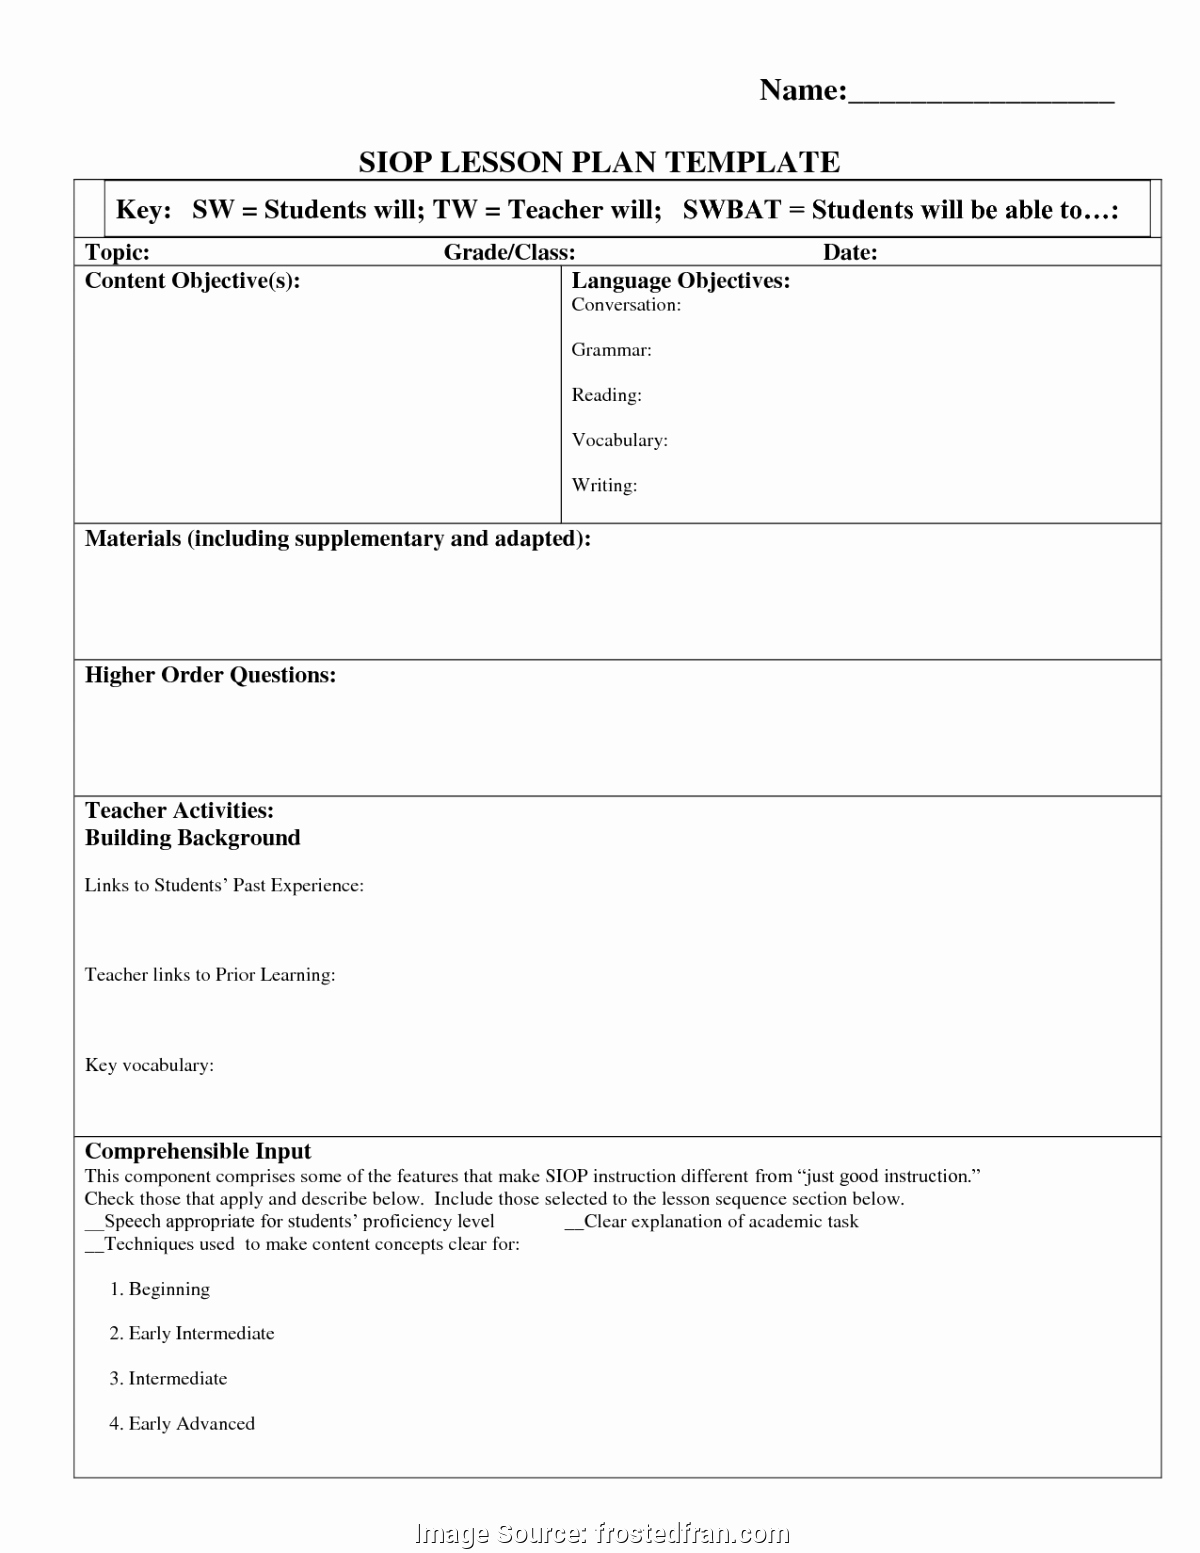 Siop Lesson Plan Template 3 Beautiful Excellent Example Lesson Plan Template Sample Lesson Plan